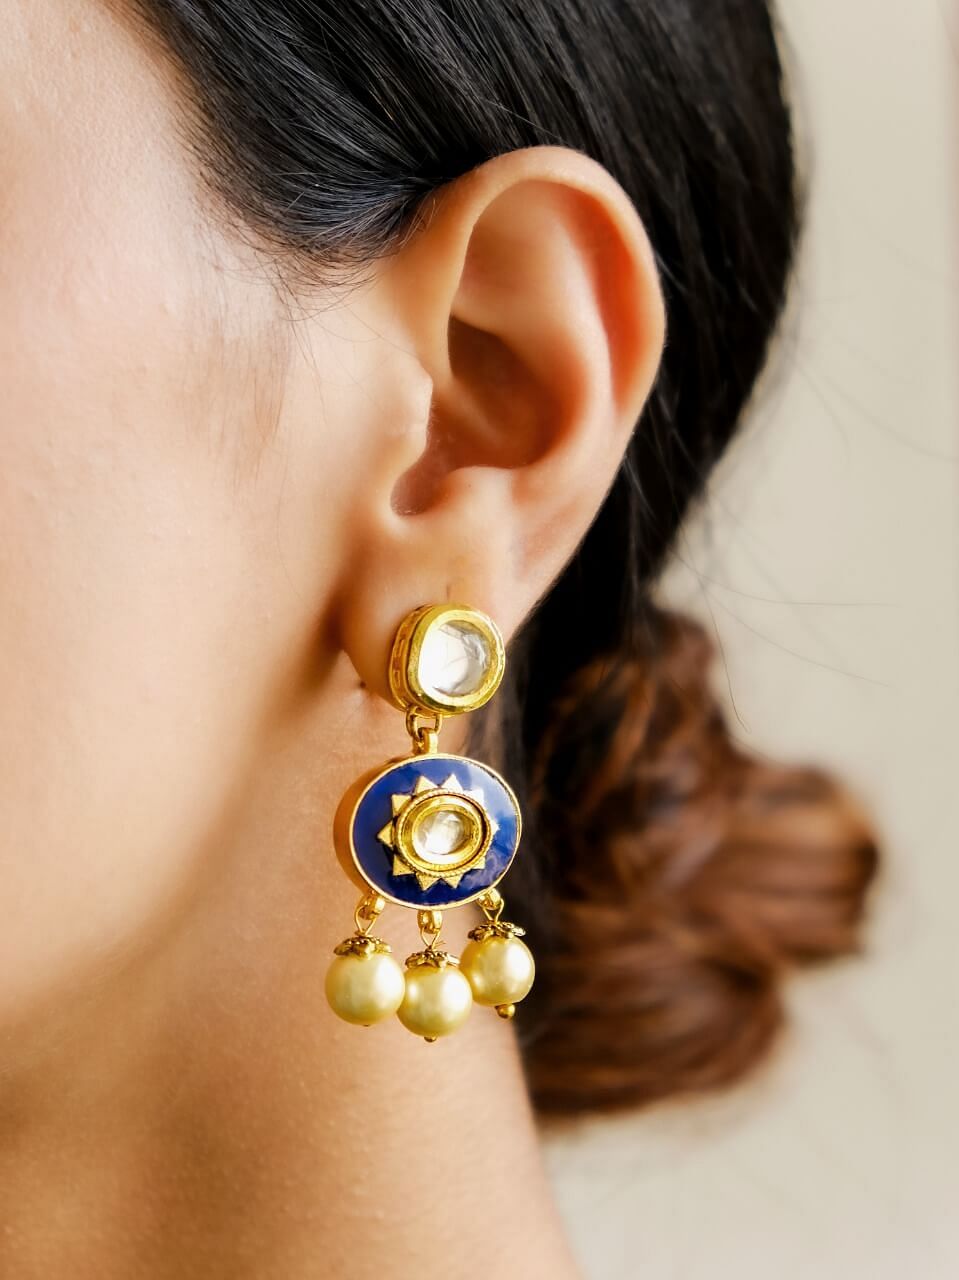 Red Blue Pearl Indian Jhumka Earrings  FashionCrabcom